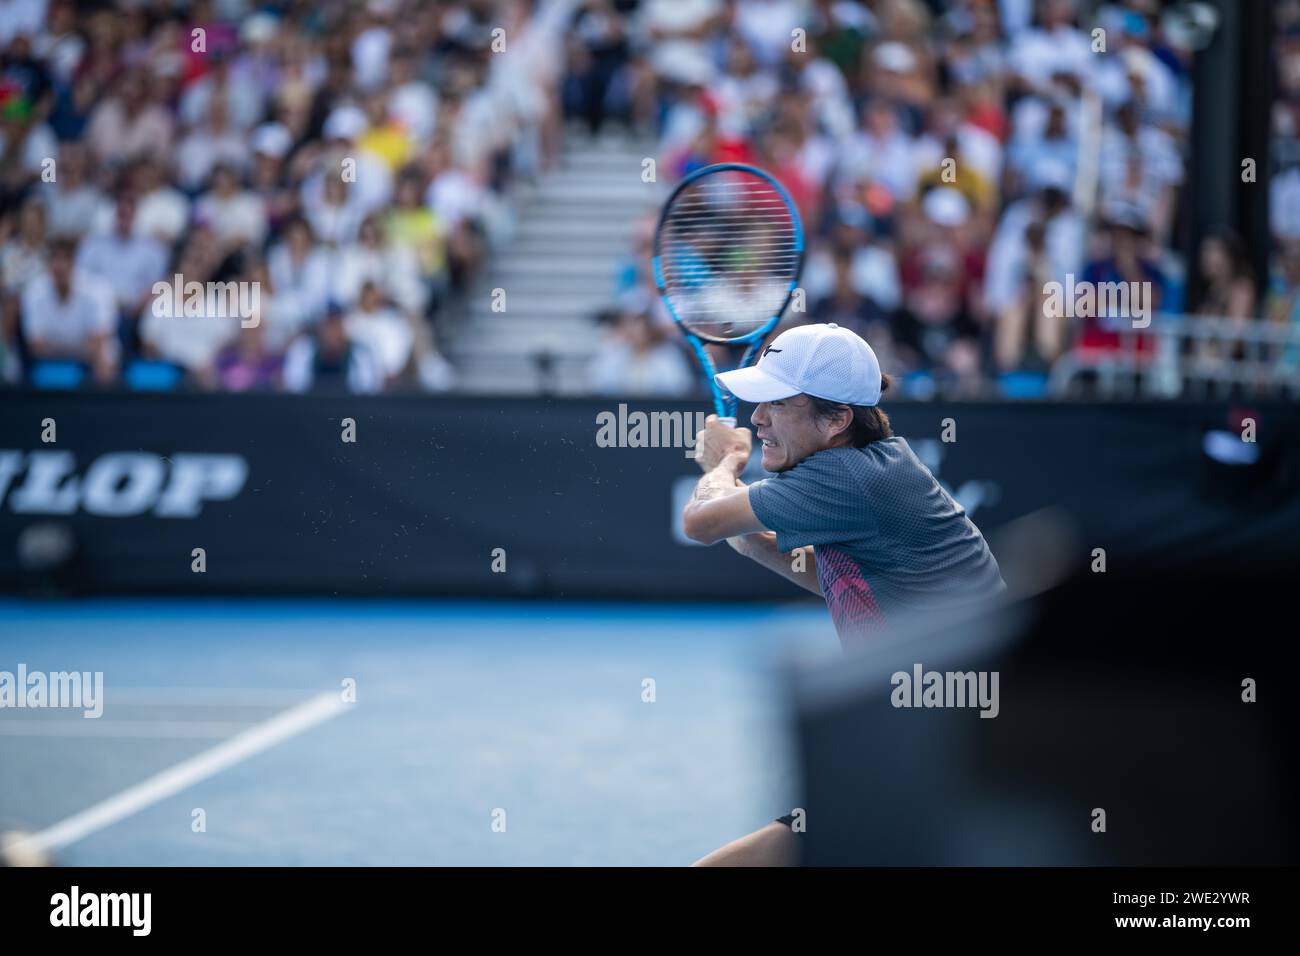 Amateur playing tennis at a tournament. professinal tennis player serving in front of a packed tennis crowd of tennis spectators watching the tennis i Stock Photo